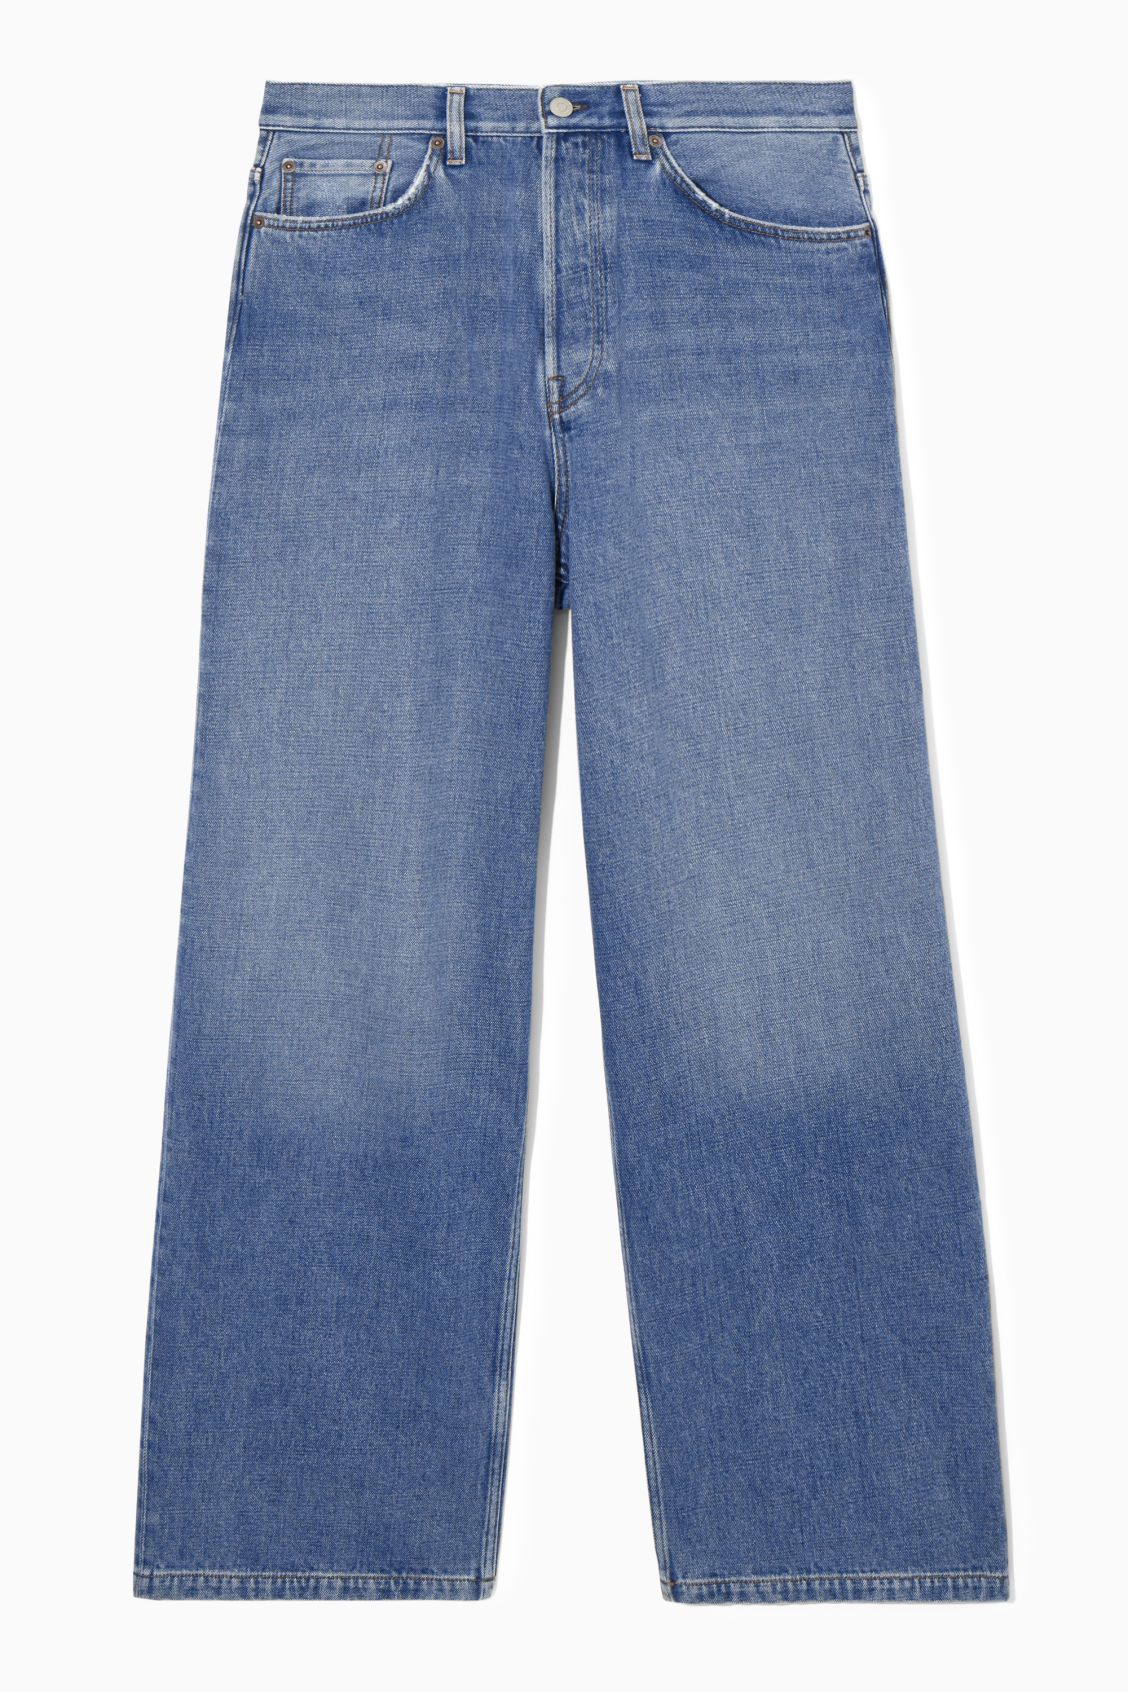 VOLUME JEANS - WIDE | COS UK